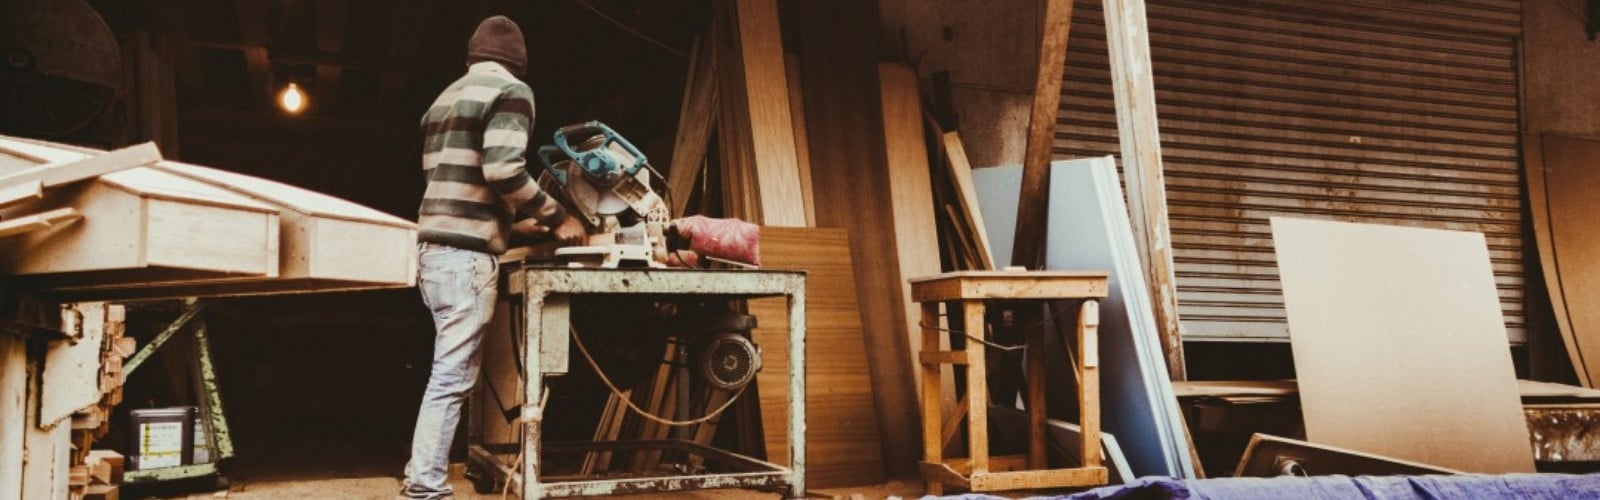 Training For Hand And Power Tool Safety In A Construction Environment